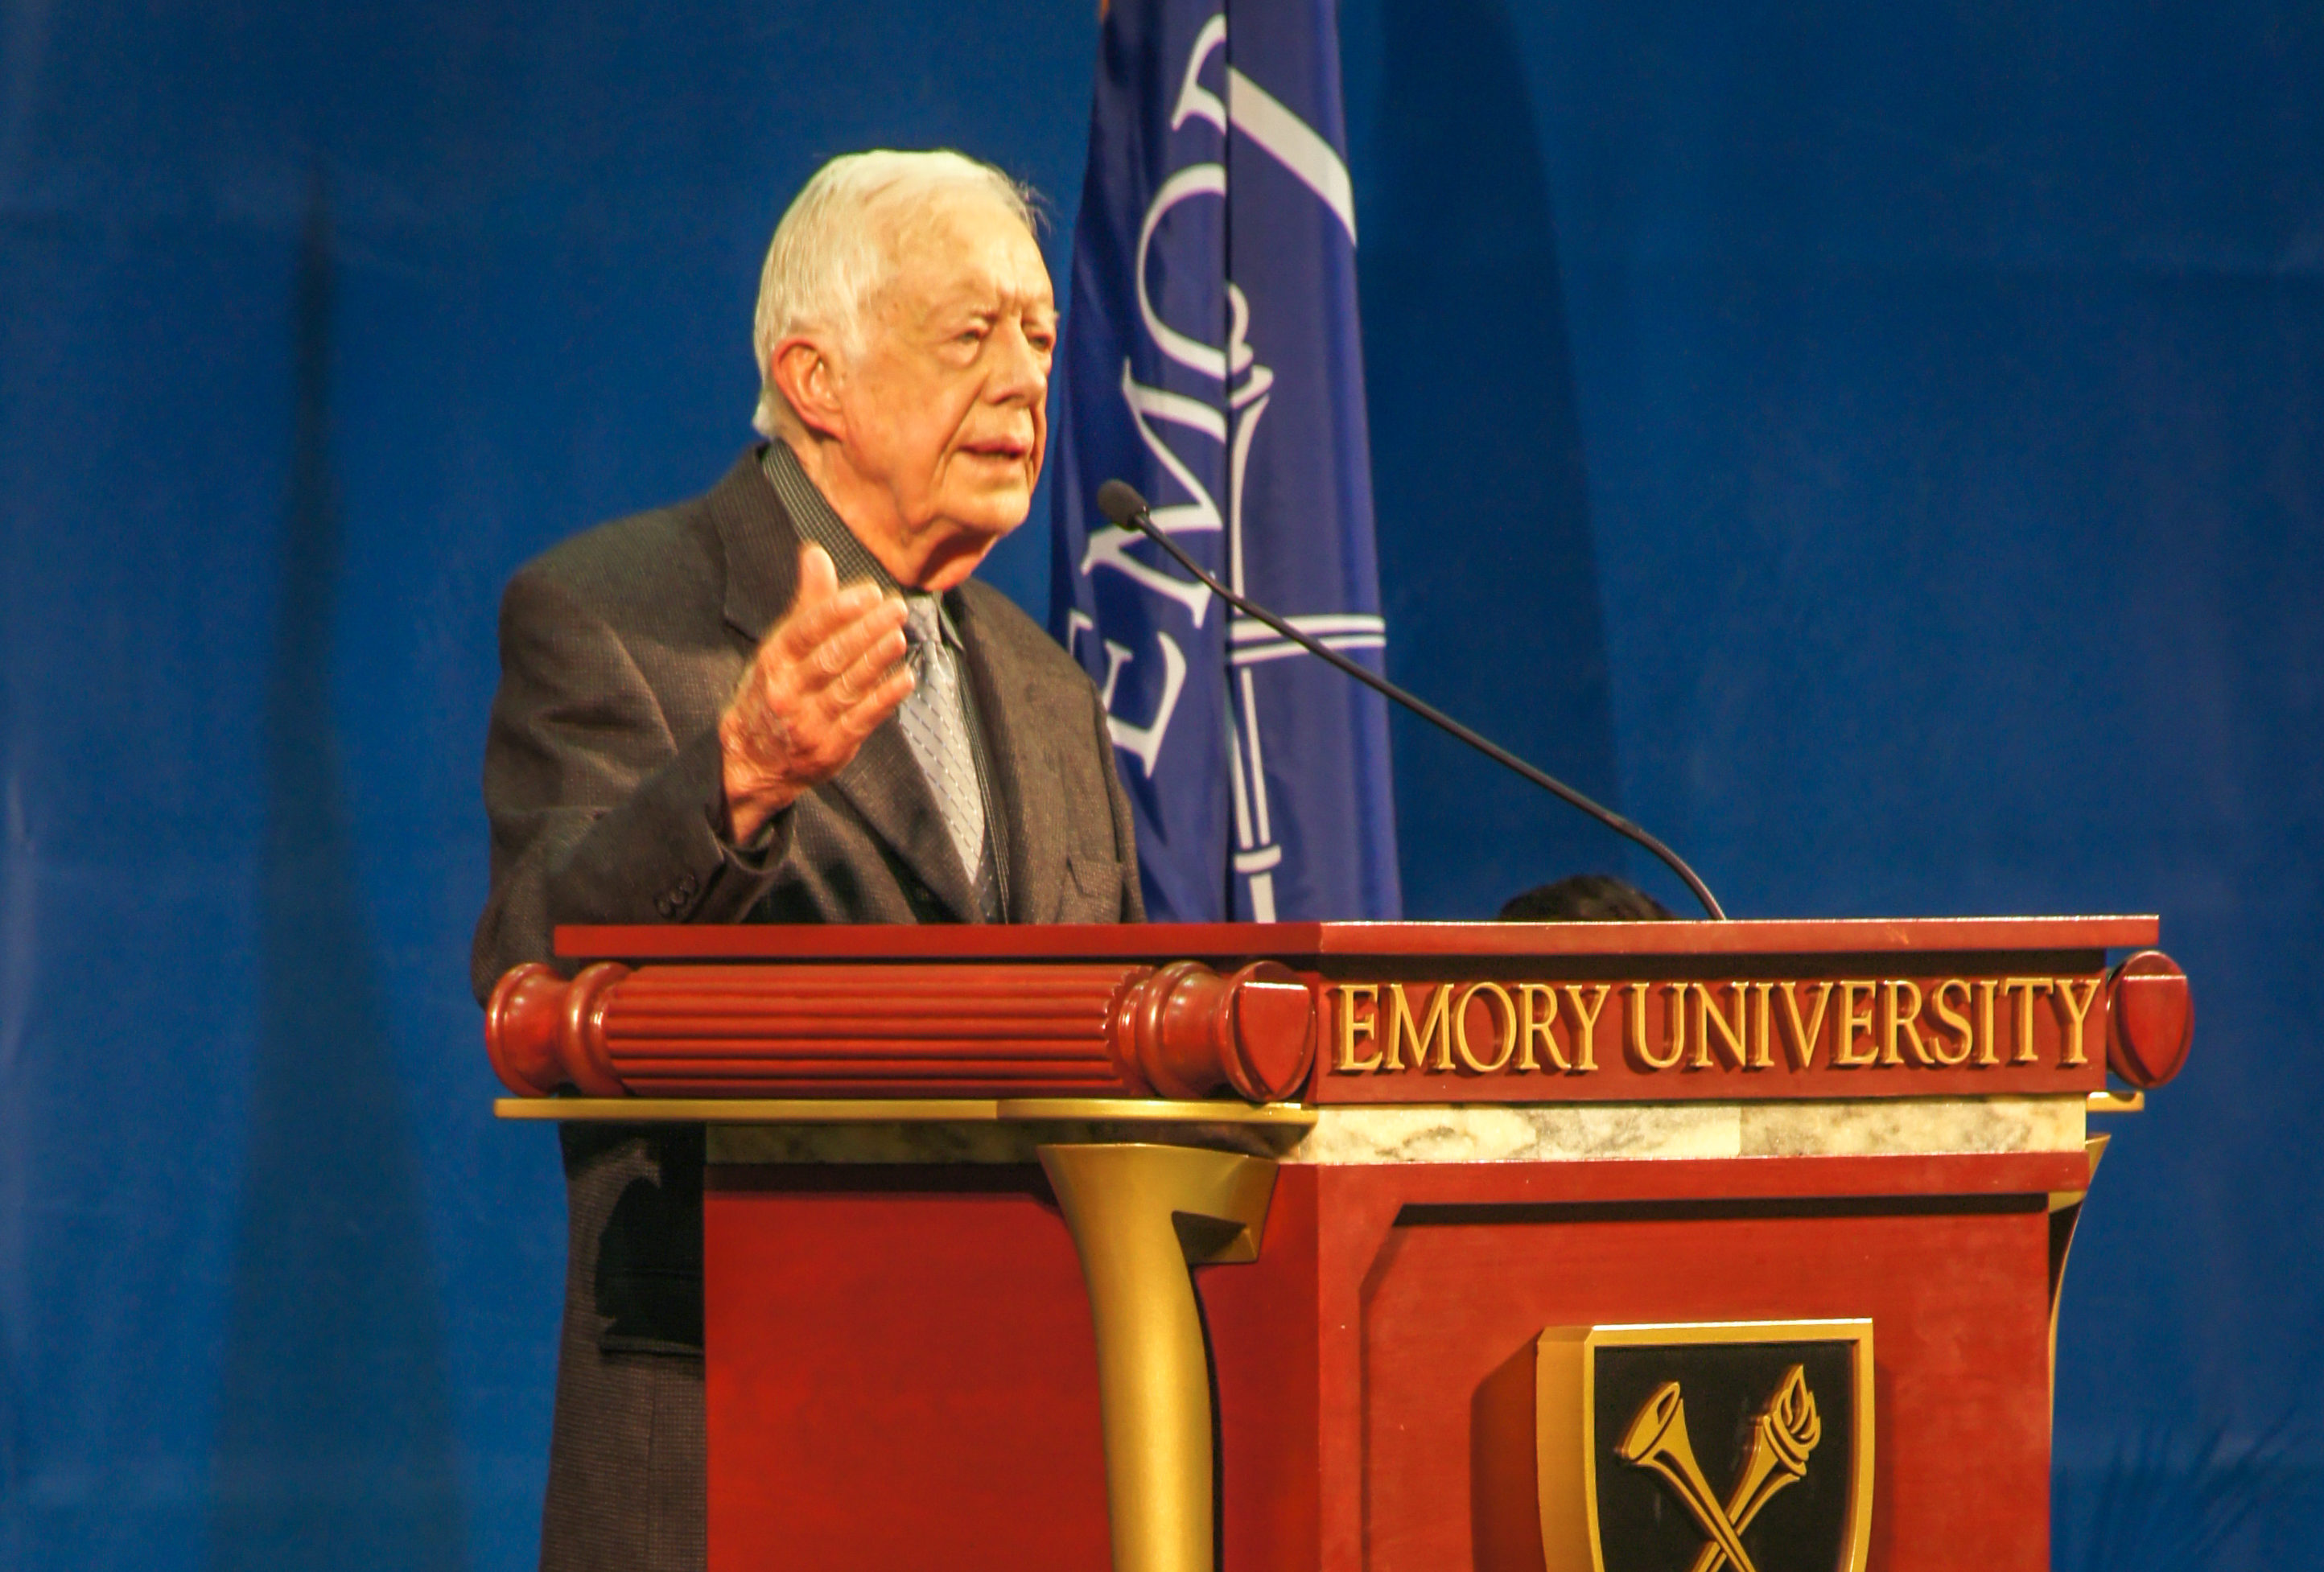 Former U.S. President and Emory Distinguished Professor Jimmy Carter takes the stage at his annual Emory town hall to discuss gender discrimination and his hopes for the election season. 